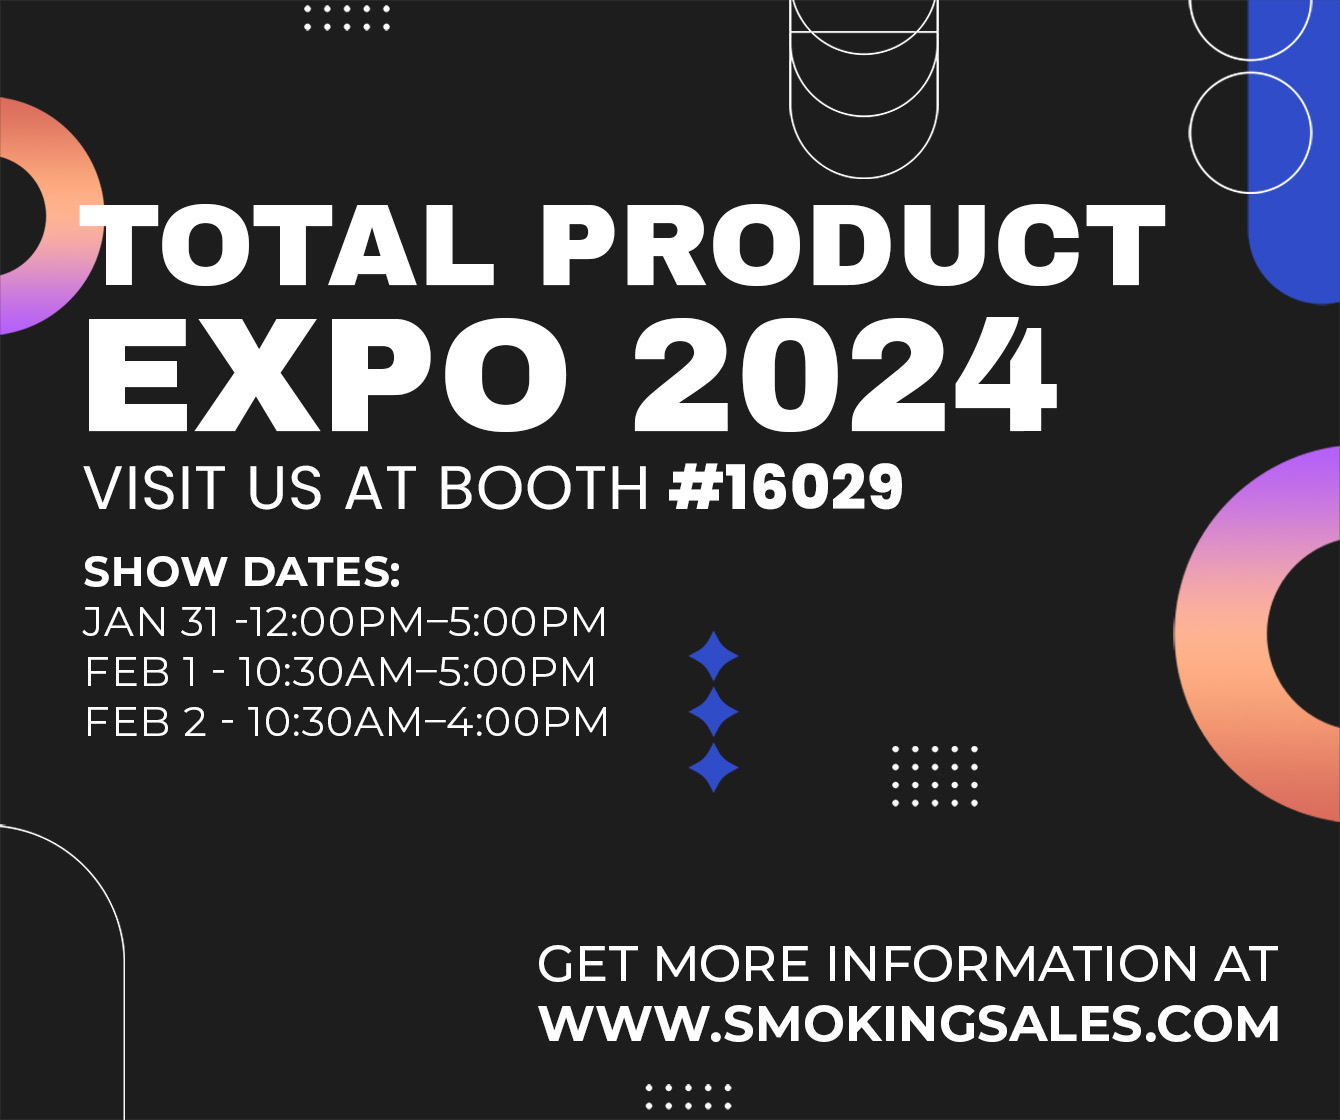 Total Product Expo 2024 A GameChanging Collaboration with Top Brands